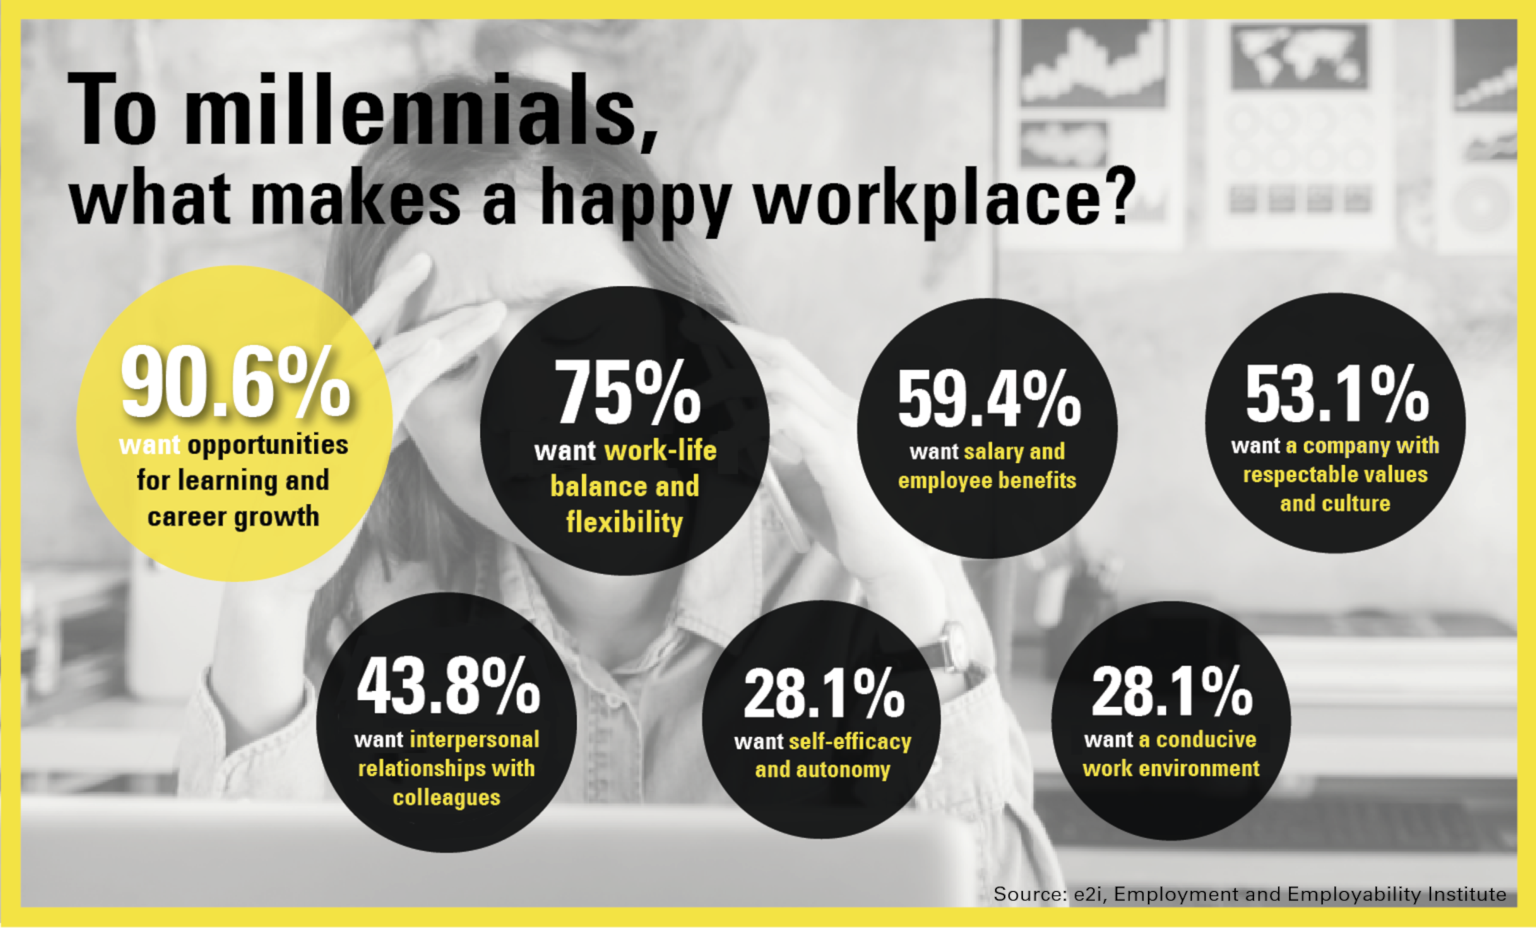 What Millennials Want - What makes a happy workplace